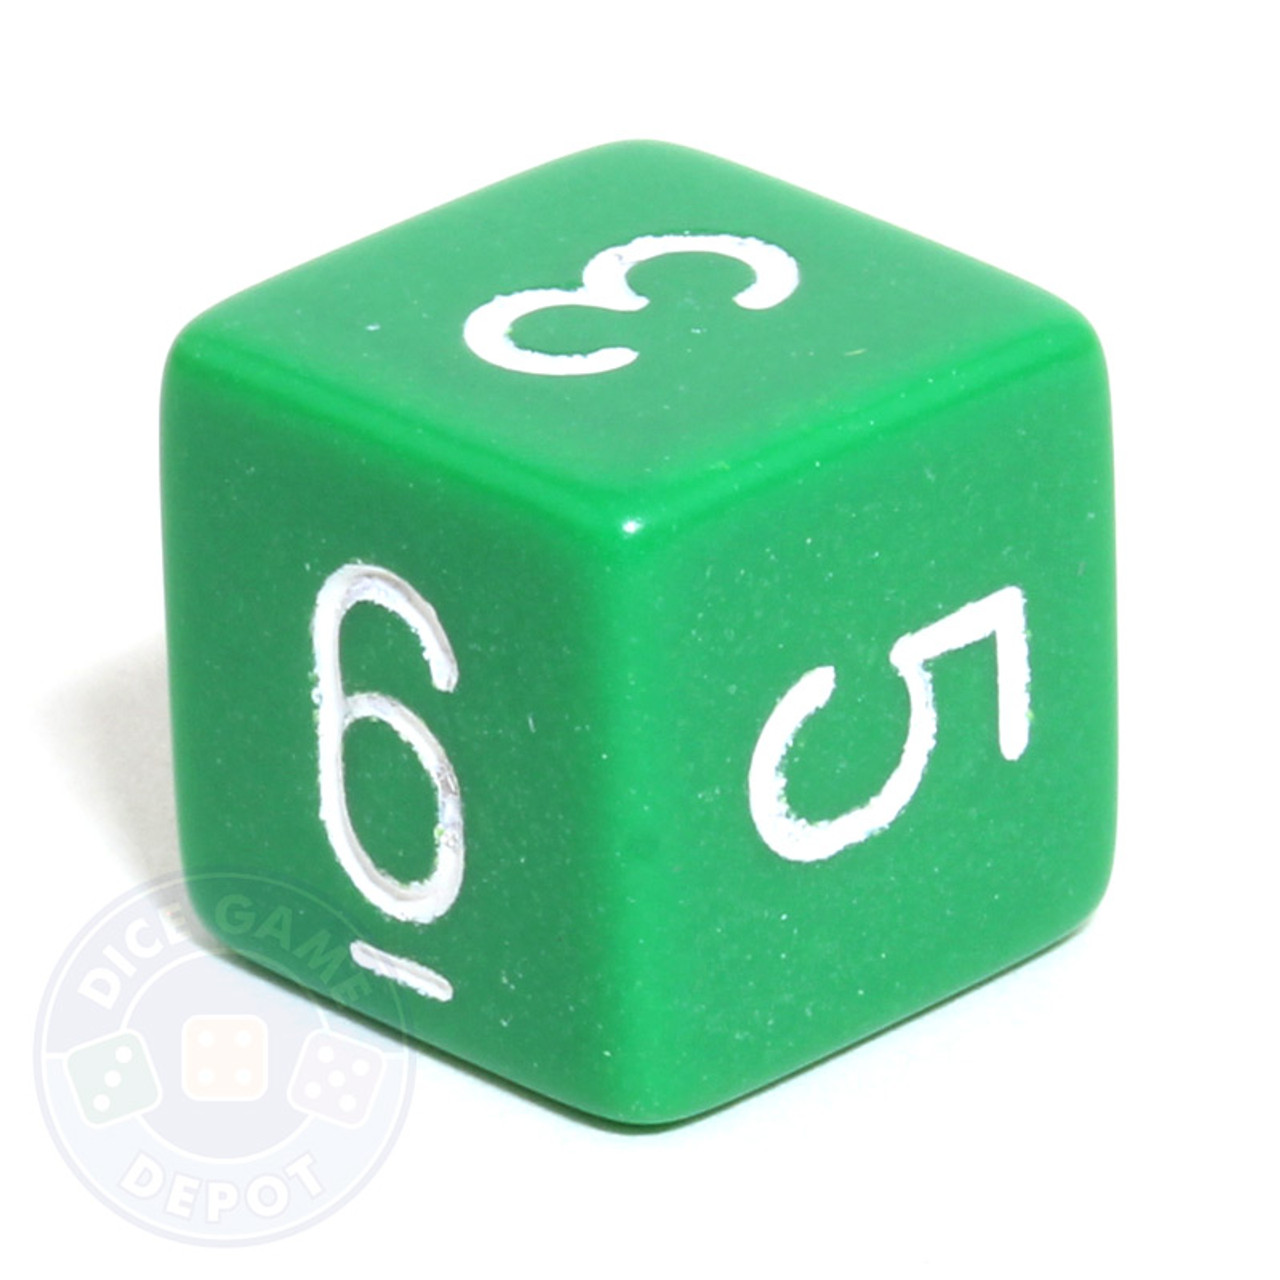 Opaque Numeral Dice - Green d6